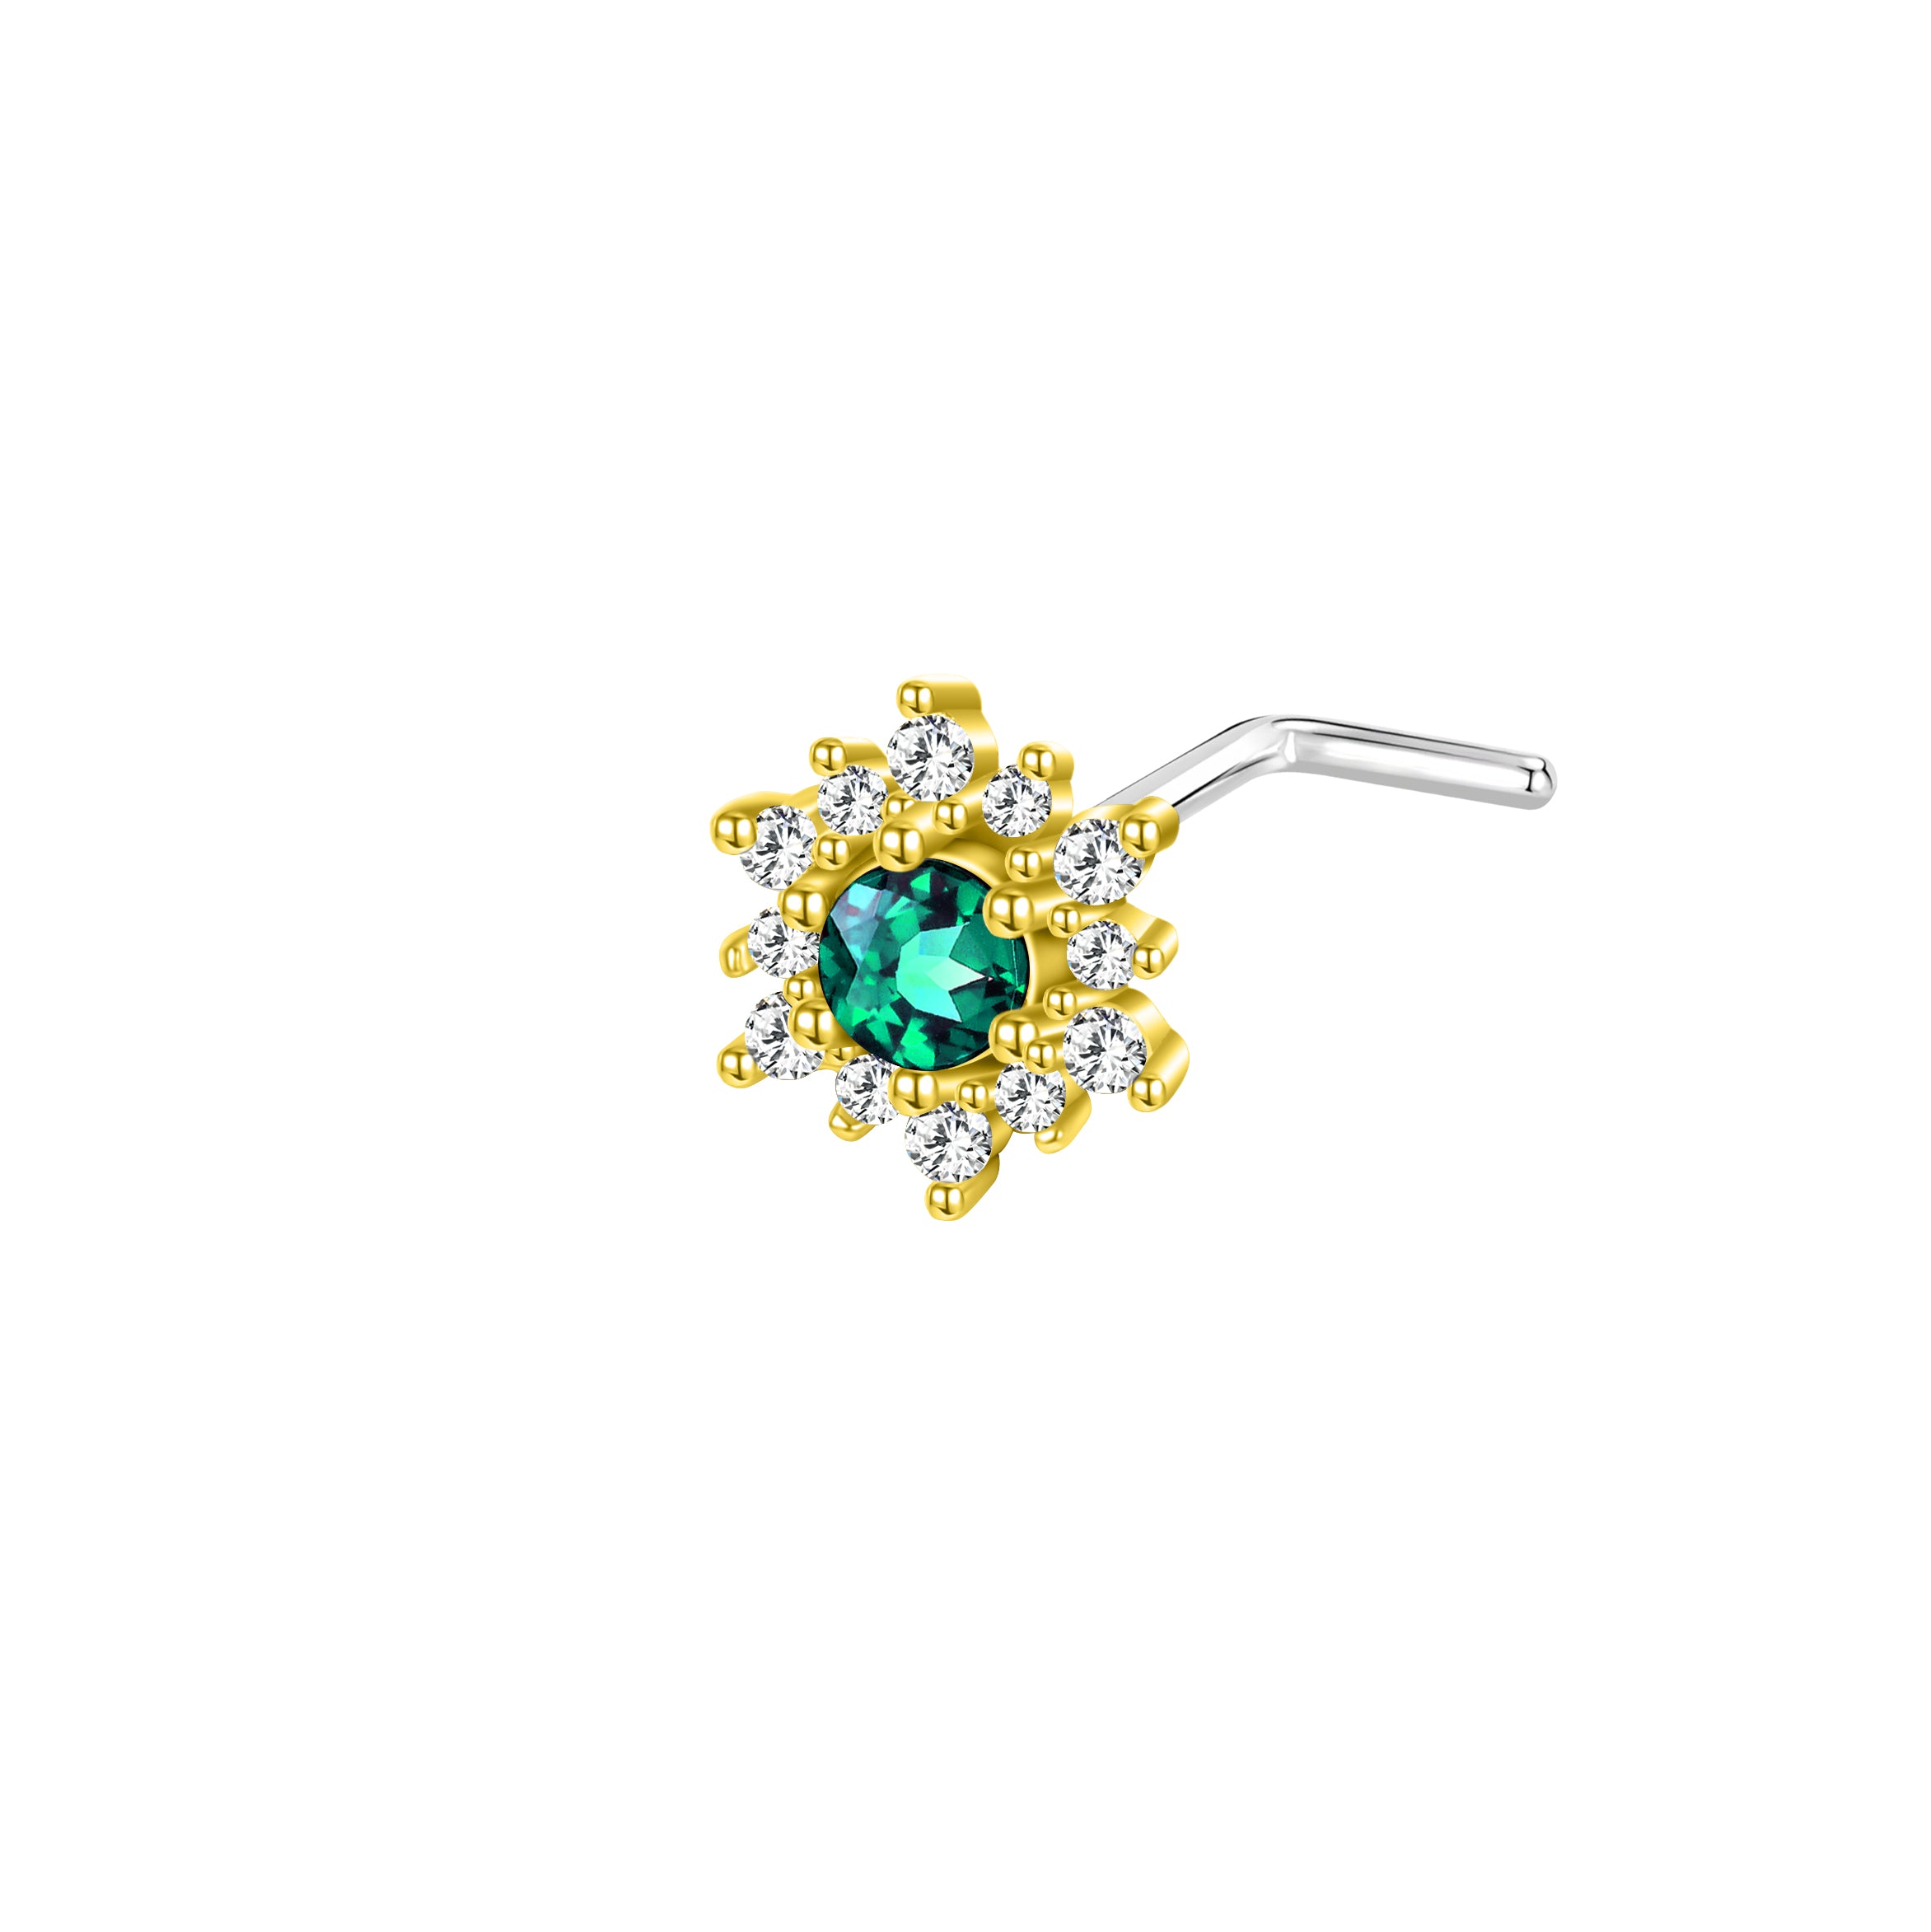 20G Green Zircon Nose Studs Piercing L Shape Nose Rings Gold Silver Plated Nostril Piercing